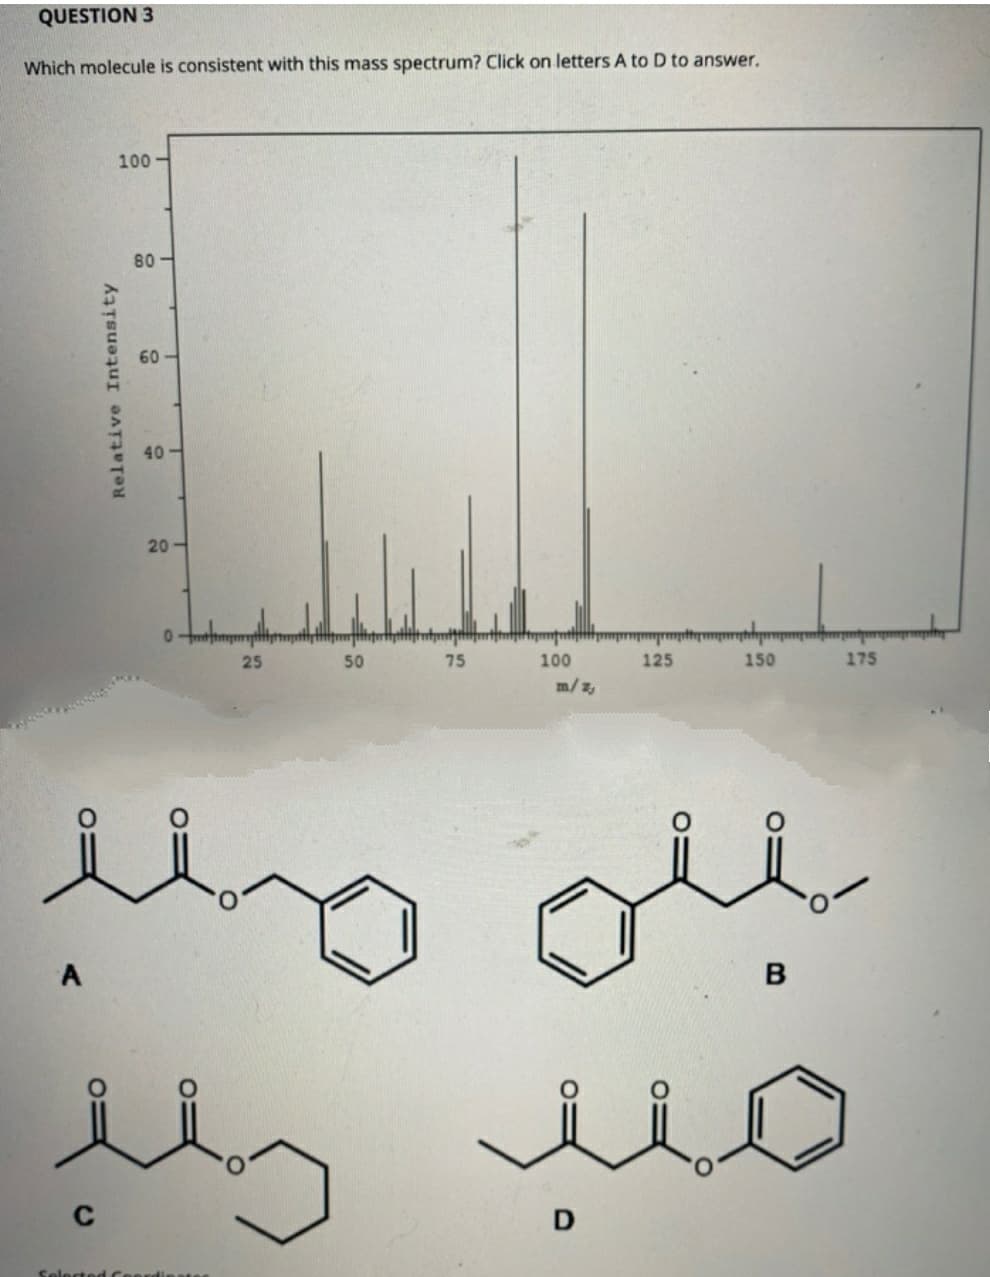 QUESTION 3
Which molecule is consistent with this mass spectrum? Click on letters A to D to answer.
100
80-
60
40 -
20-
25
50
75
100
125
150
175
m/z,
A
C
D
Selected Ceerd
Relative Intensity
